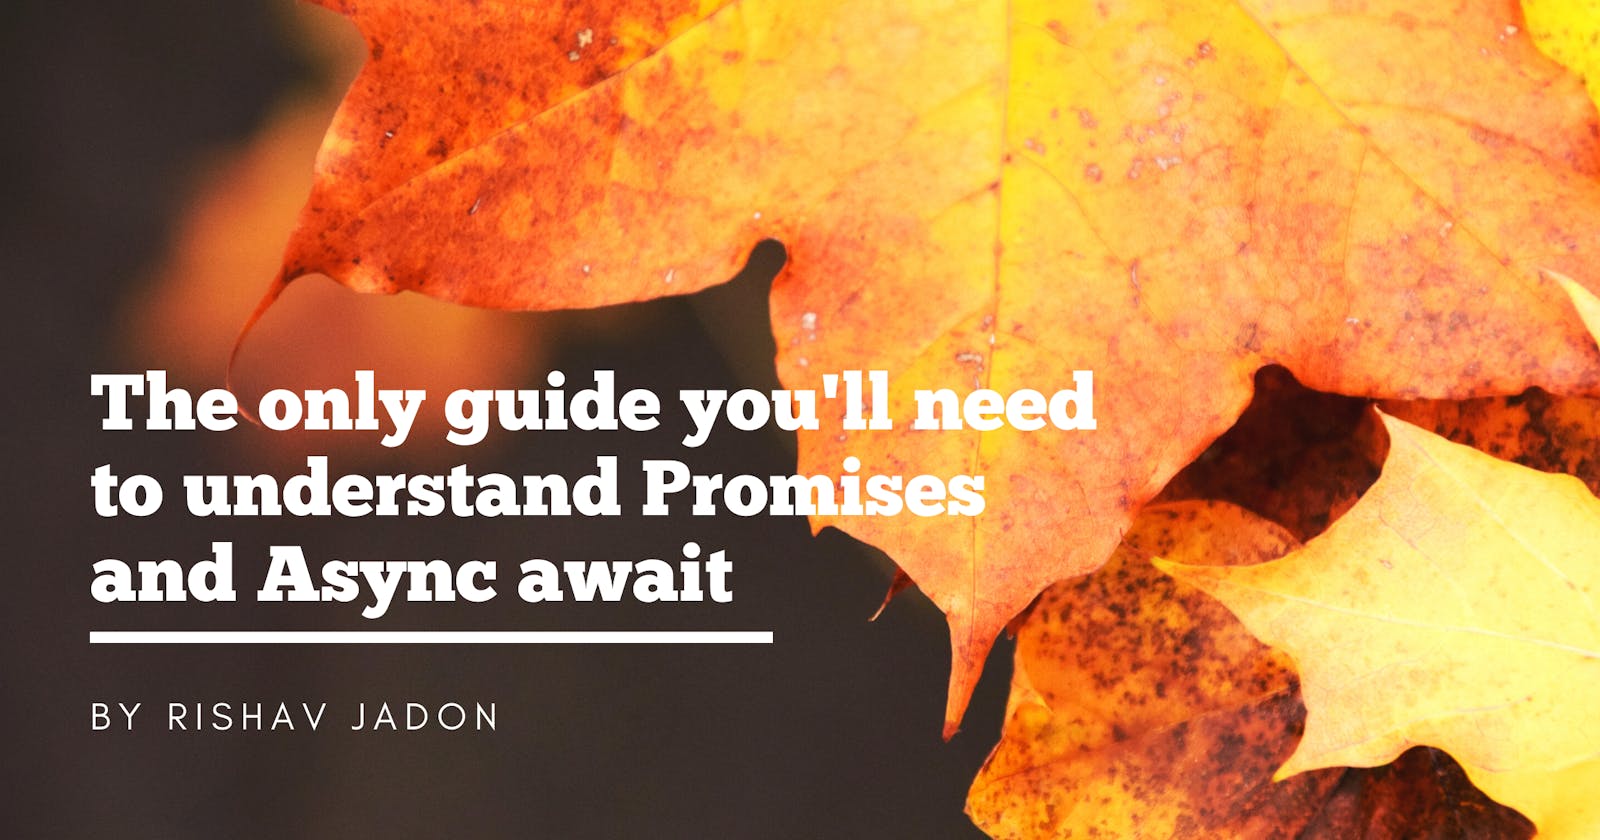 The only guide you'll ever need to understand Promises and Async await